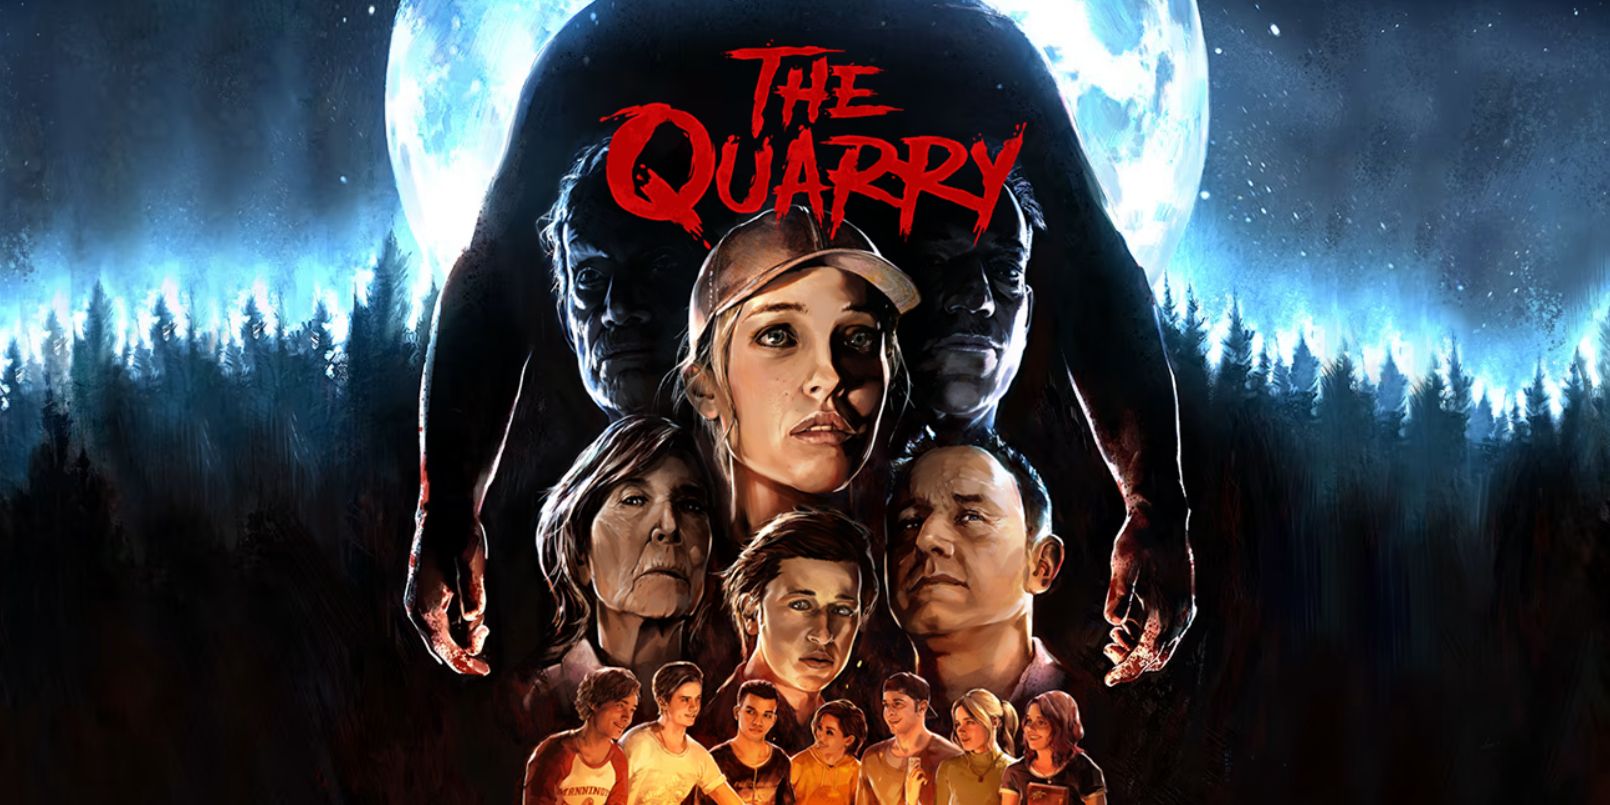 The cover of The Quarry, styled to look like a classic '80s horror movie poster